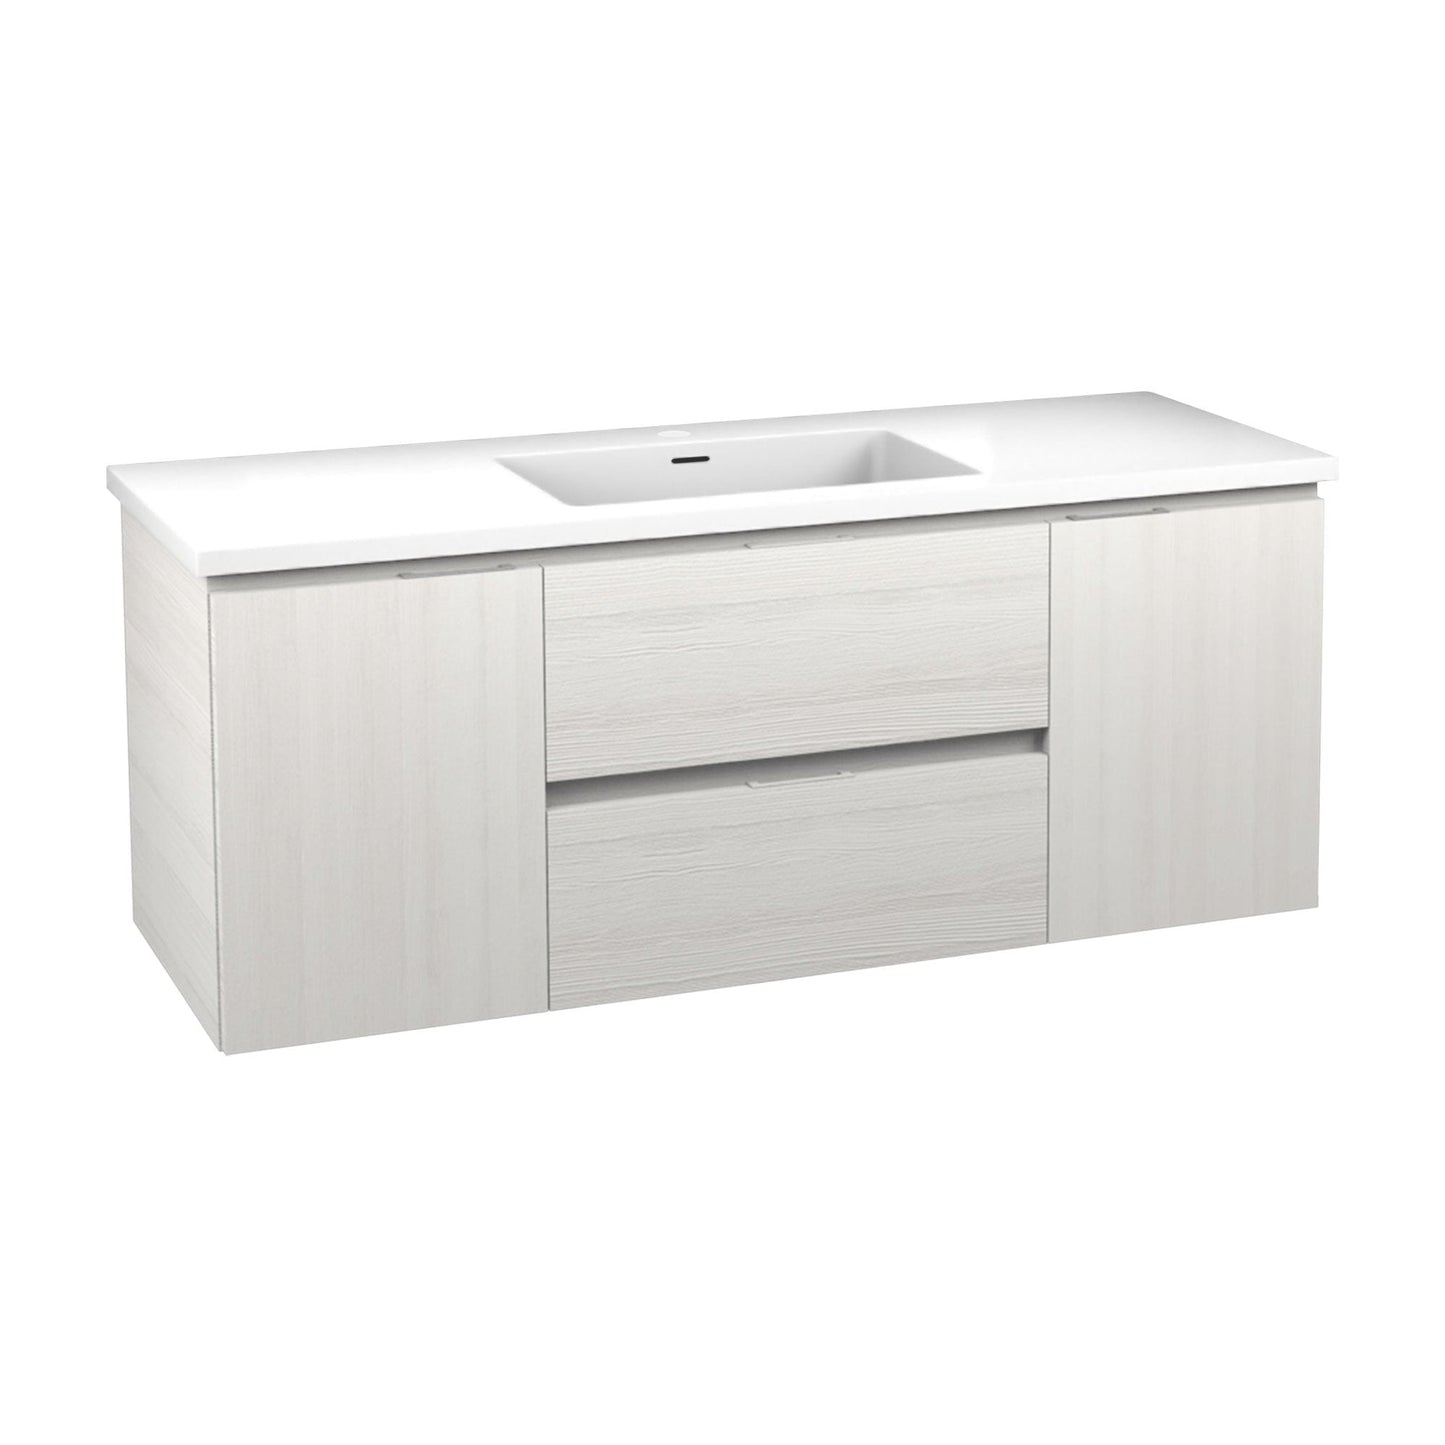 ANZZI Conques 48" x 20" Rich White Solid Wood Bathroom Vanity With Glossy White Sink and Countertop